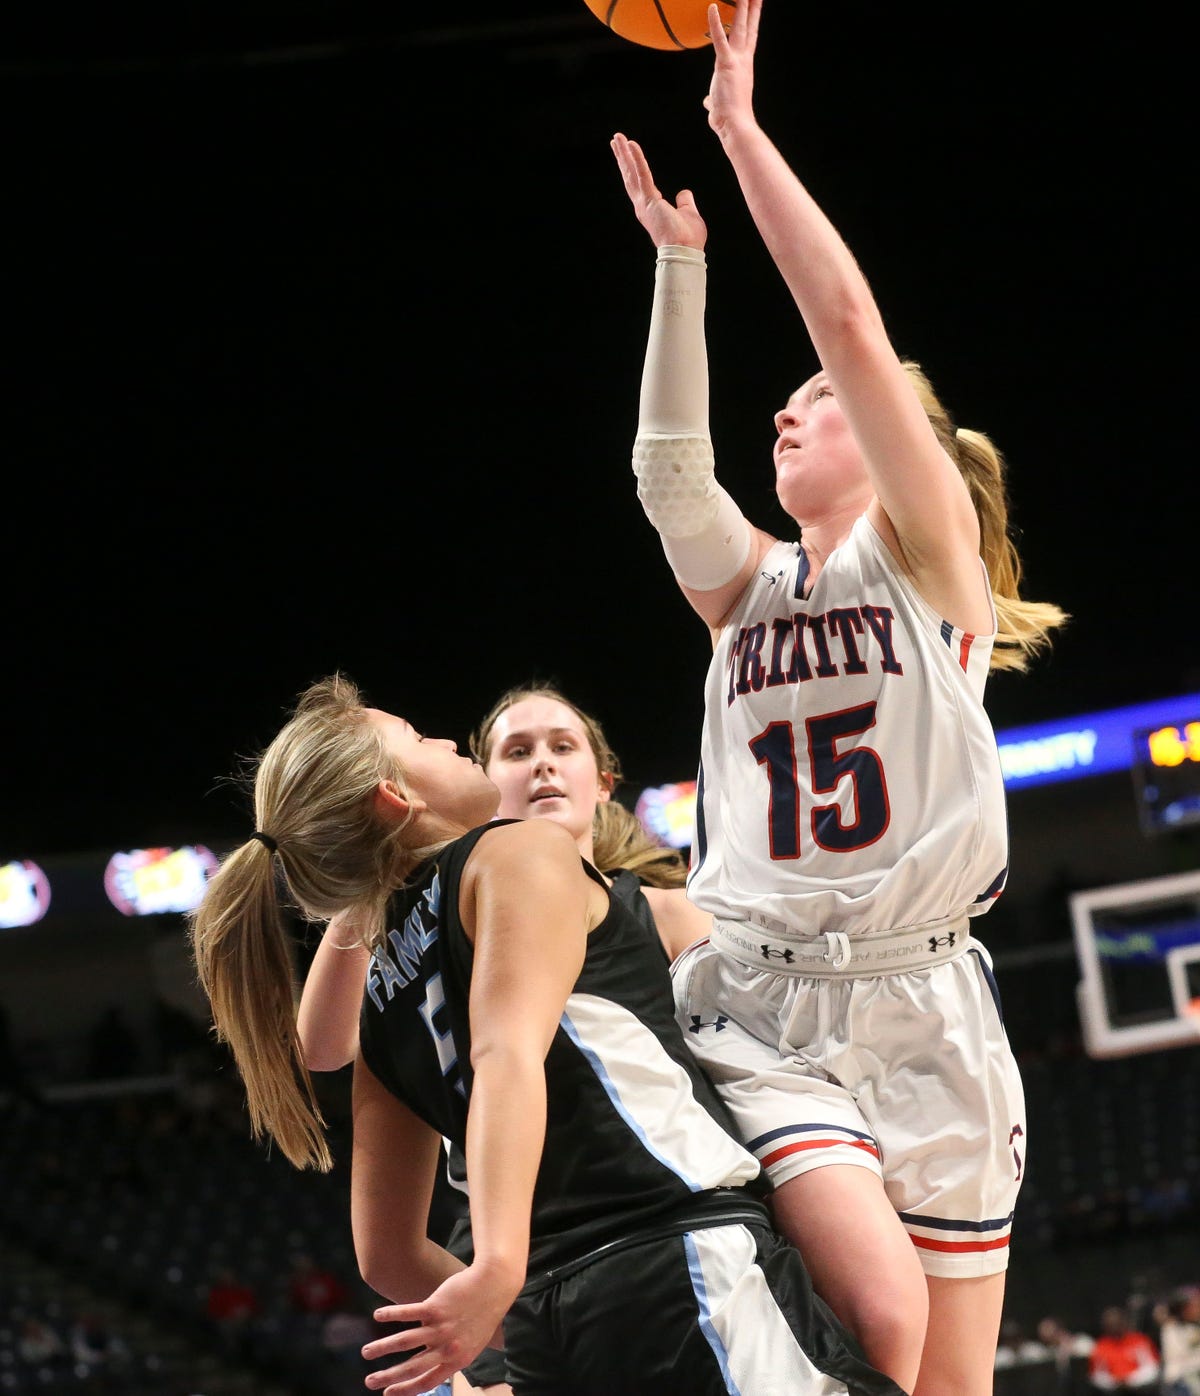 Trinity girls basketball wins back-to-back class 3A state championships defeating Plainview